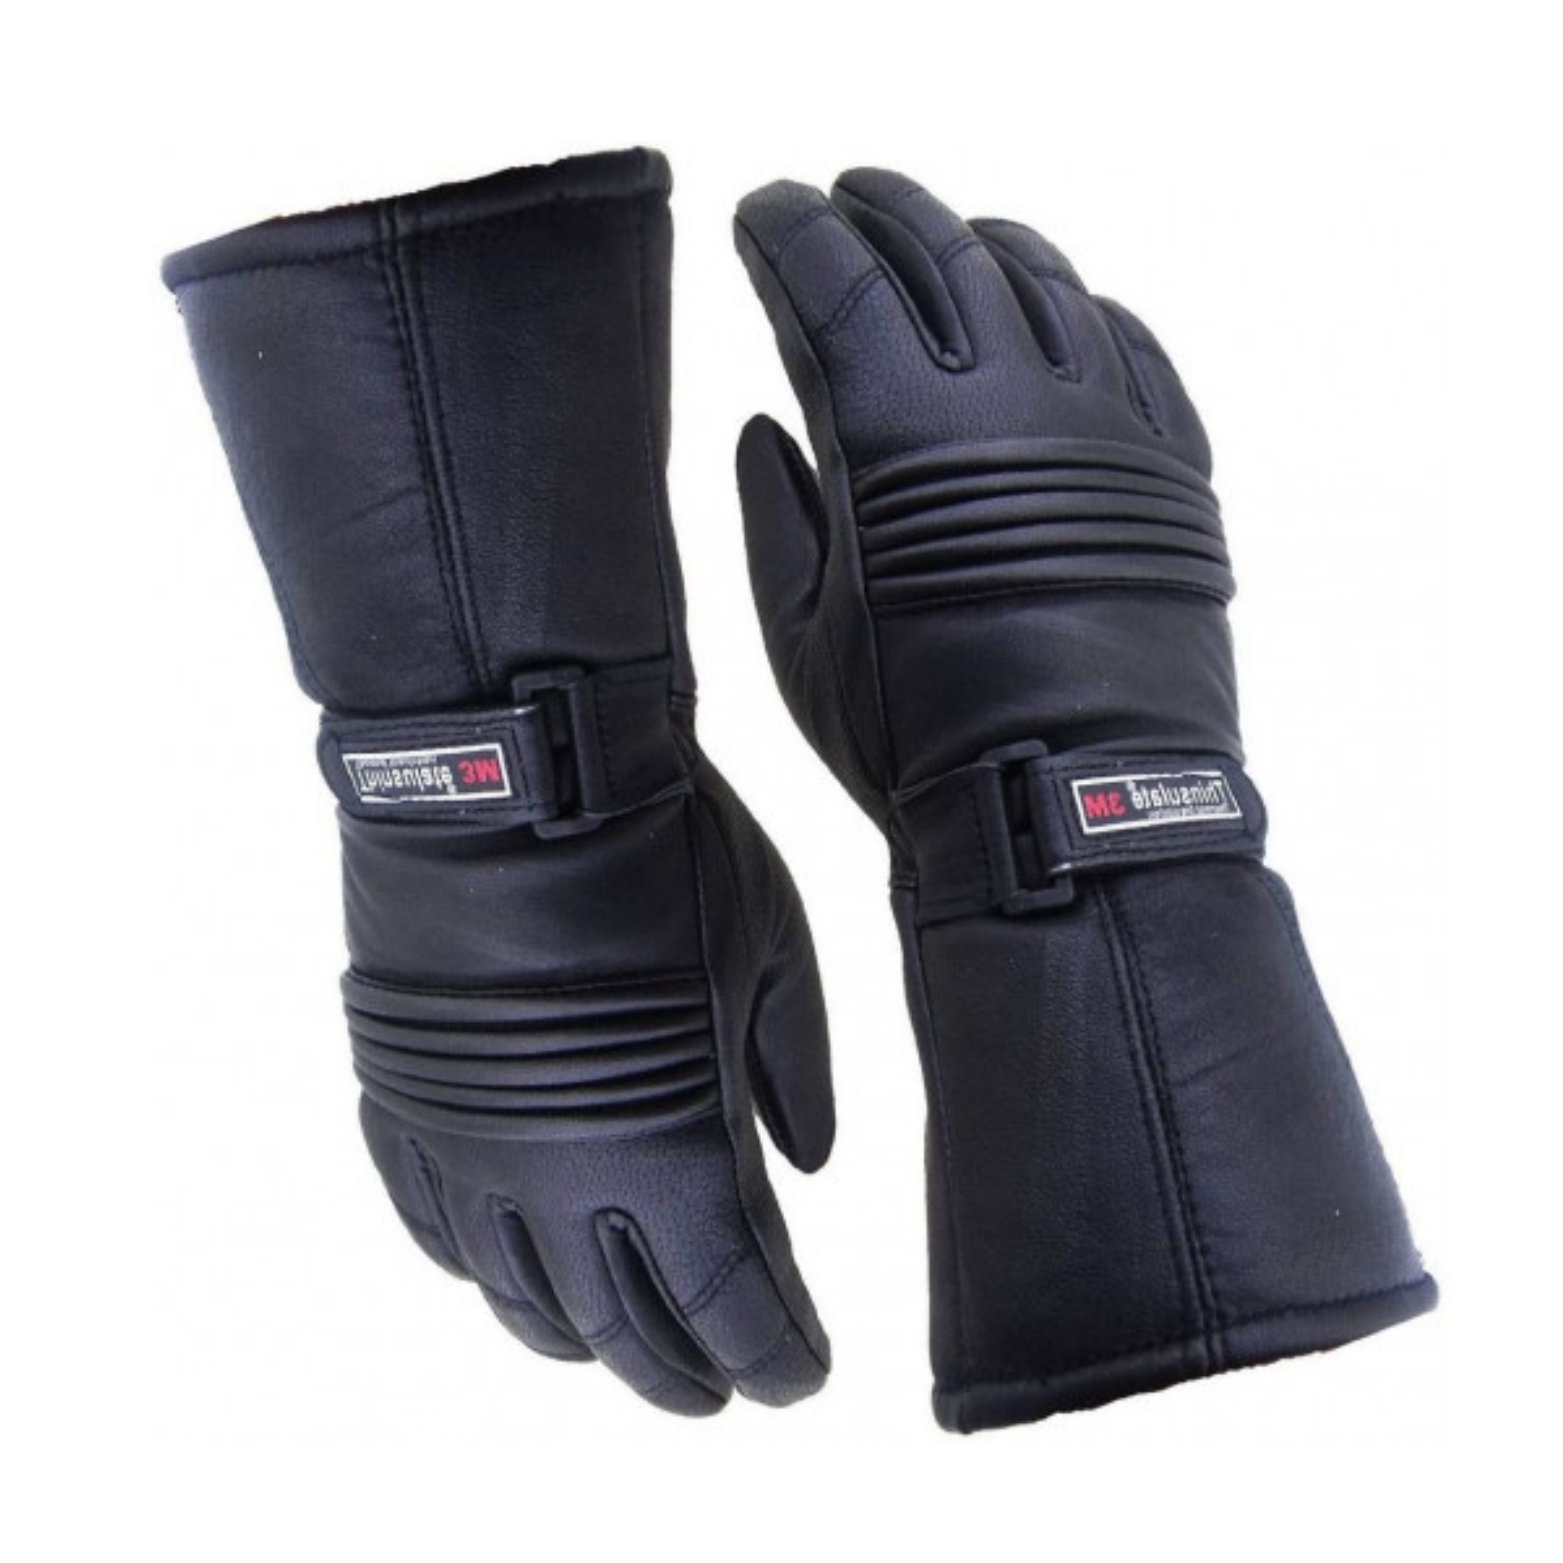 3m thinsulate leather glove m waterproof/breathable black 4302543-m